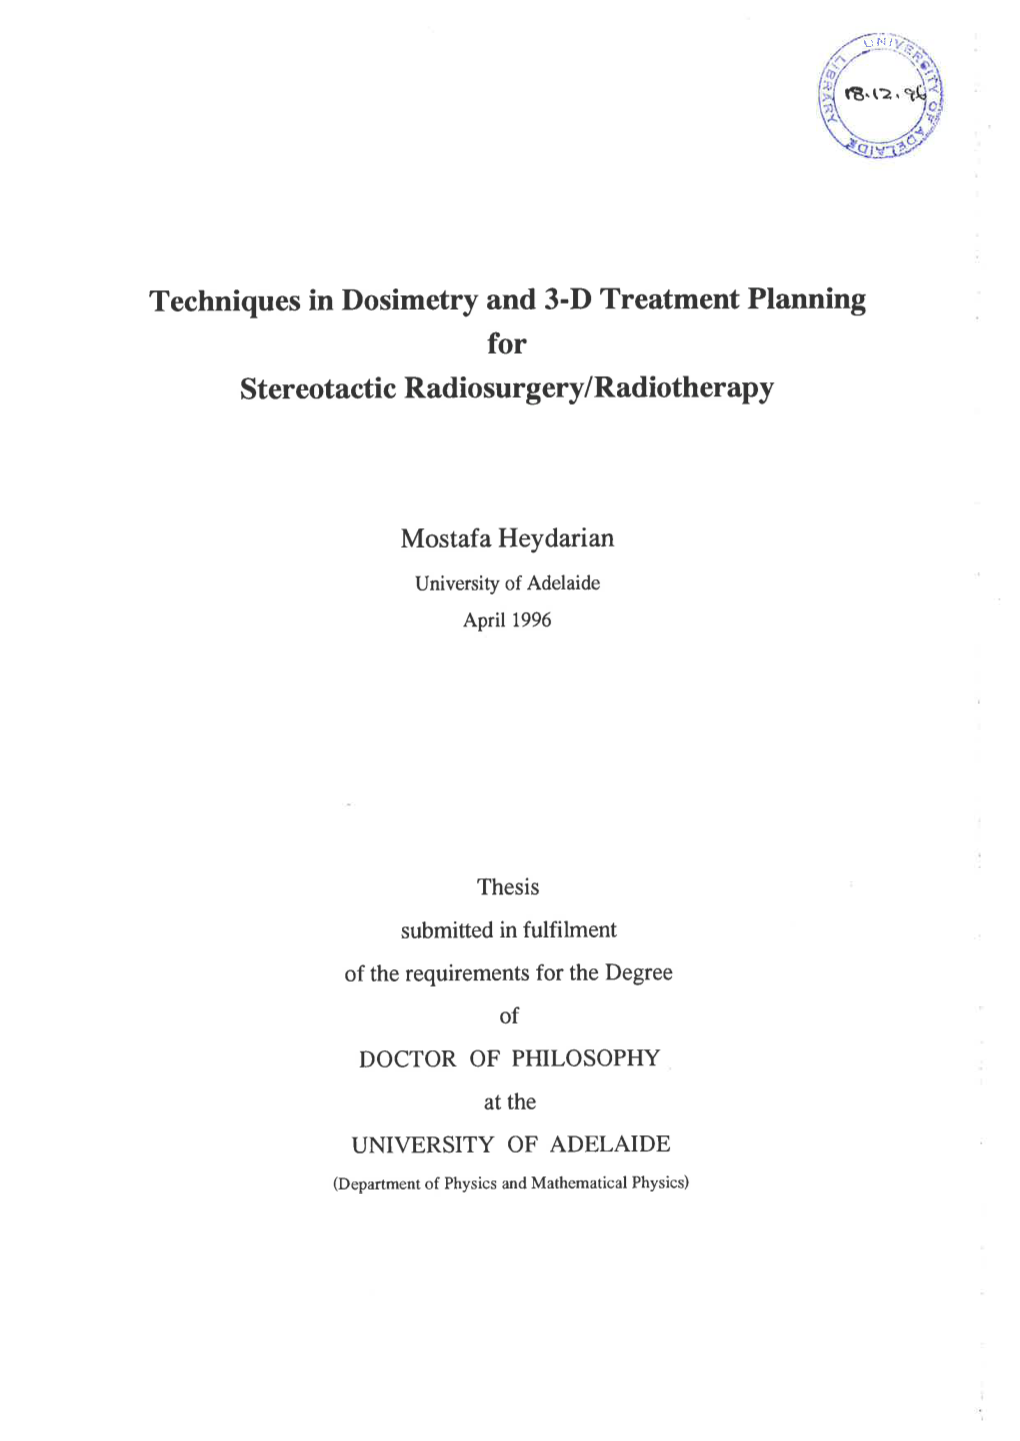 Techniques in Dosimetry and 3-D Treatment Planning for Stereotactic Radio Surgery/Radiotherapy